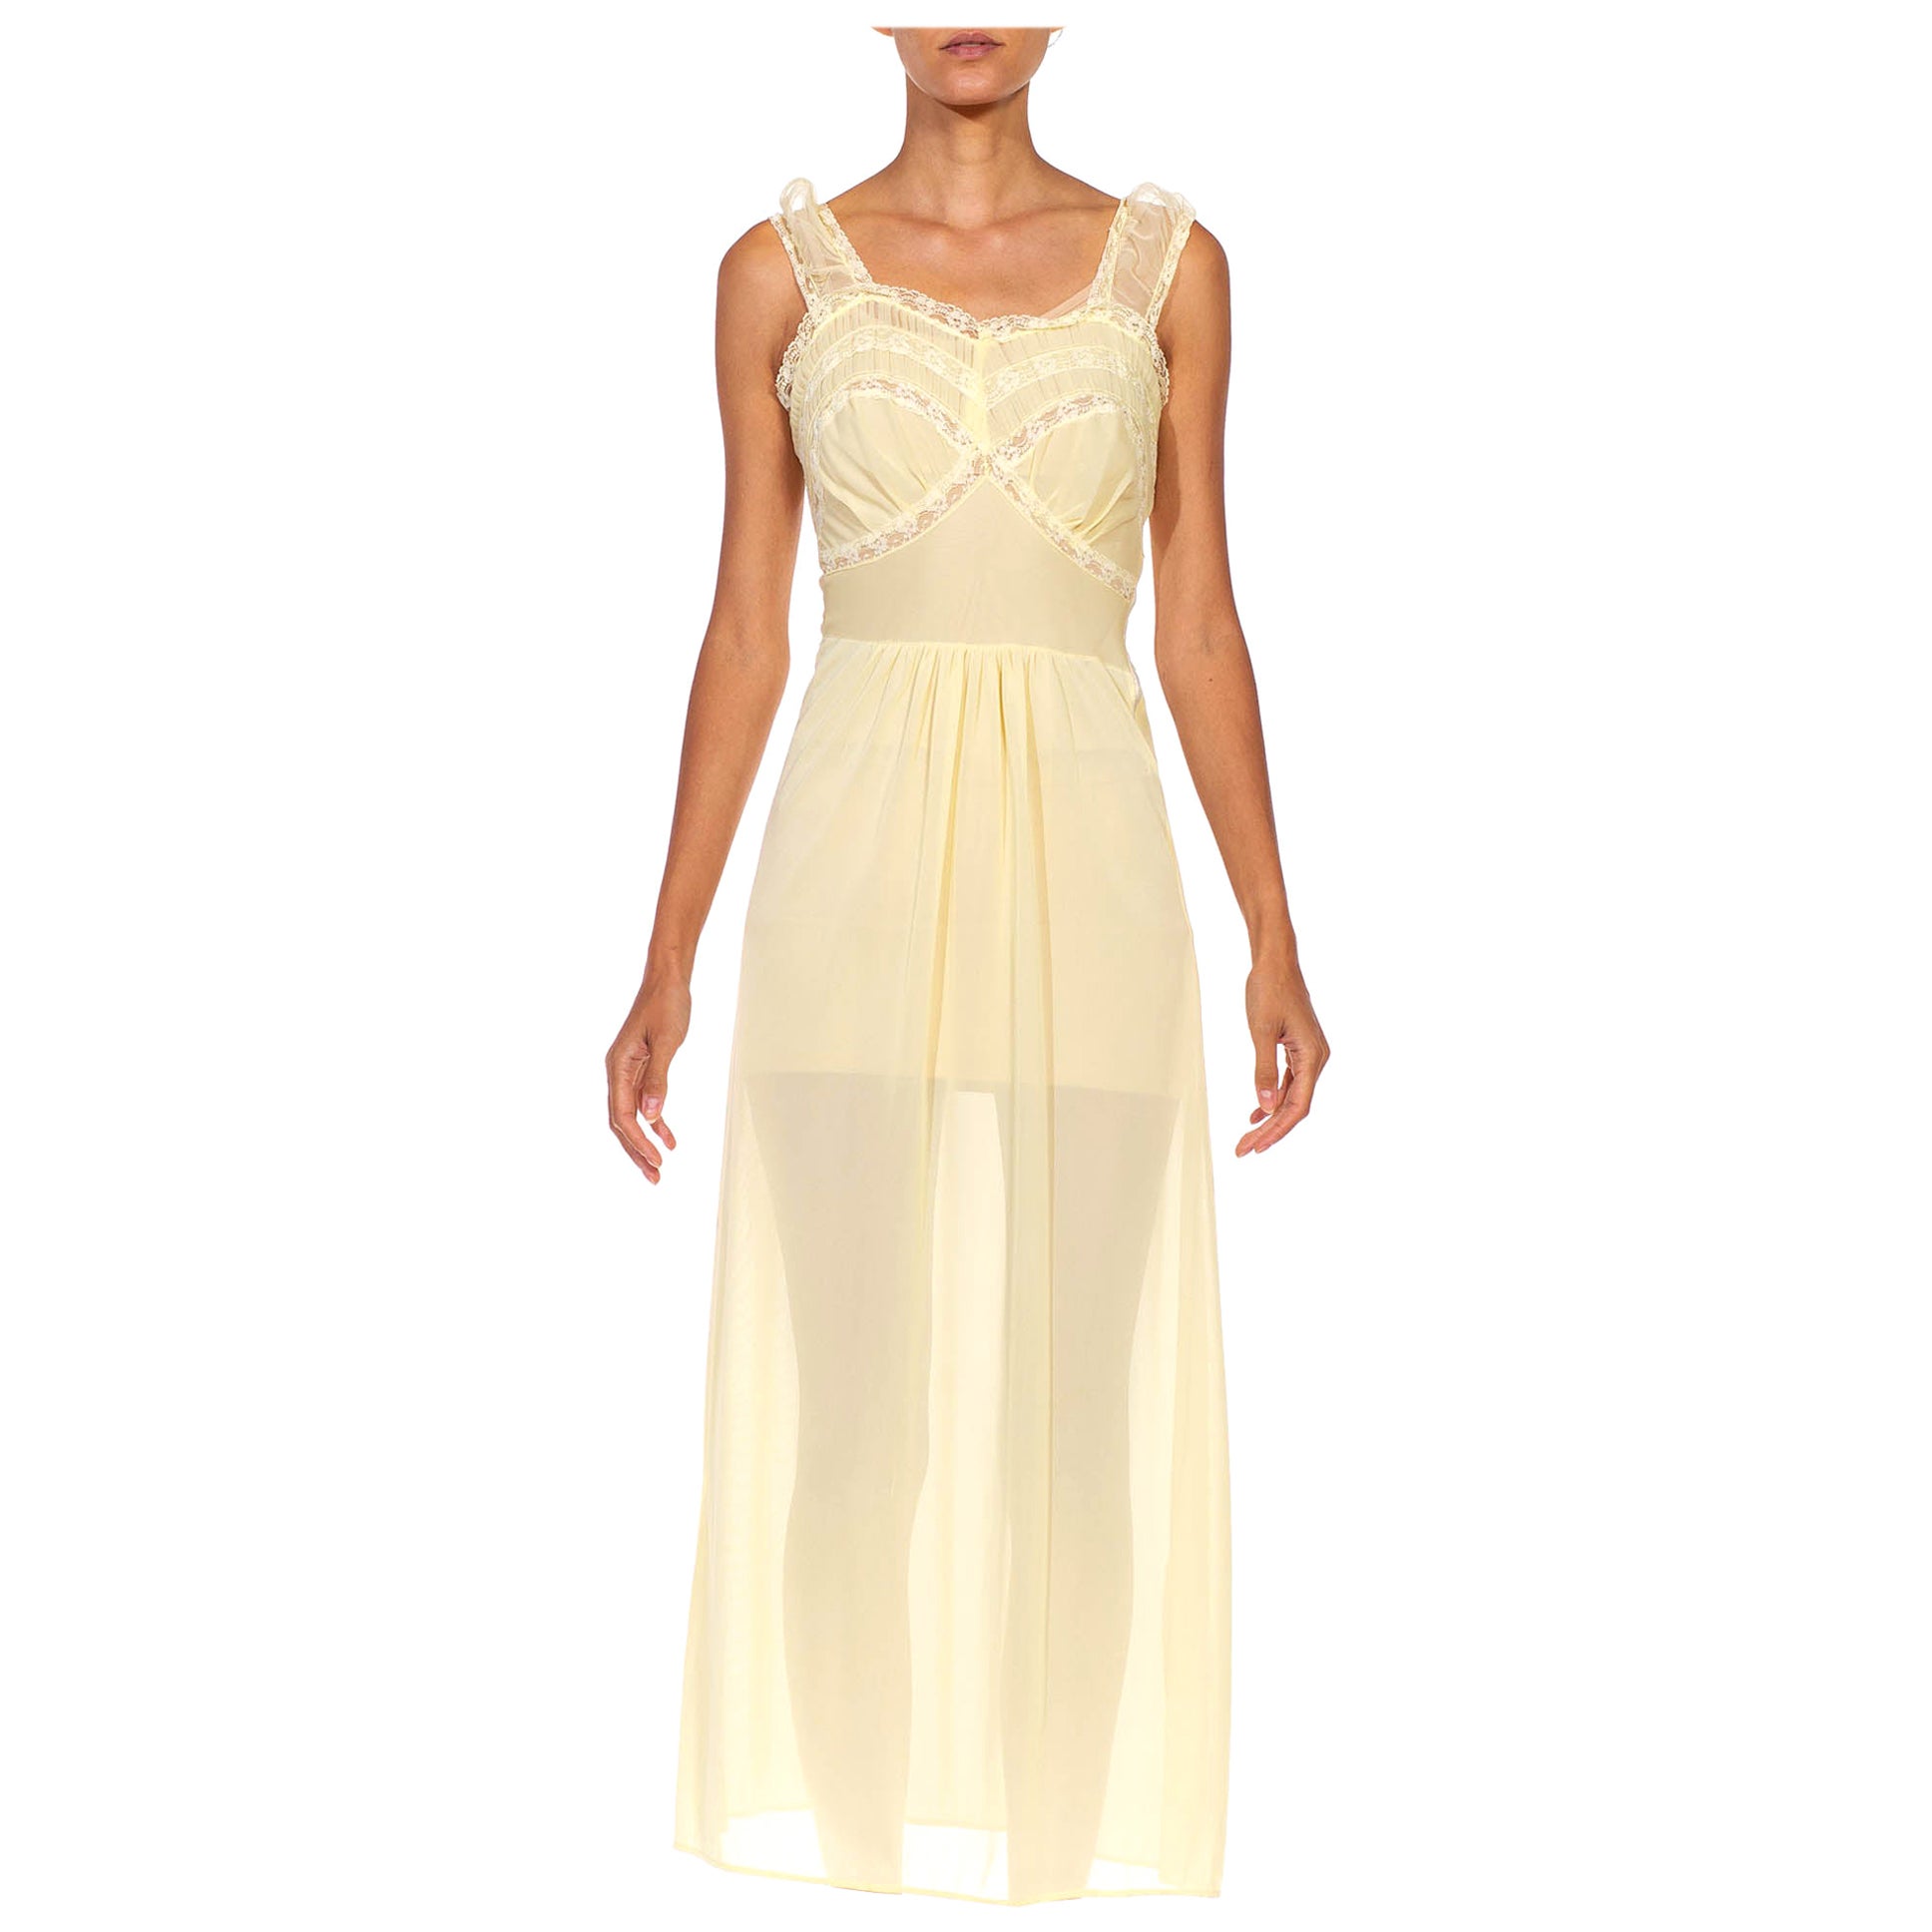 1940S Butter Yellow Rayon Lace Trim Negligee For Sale